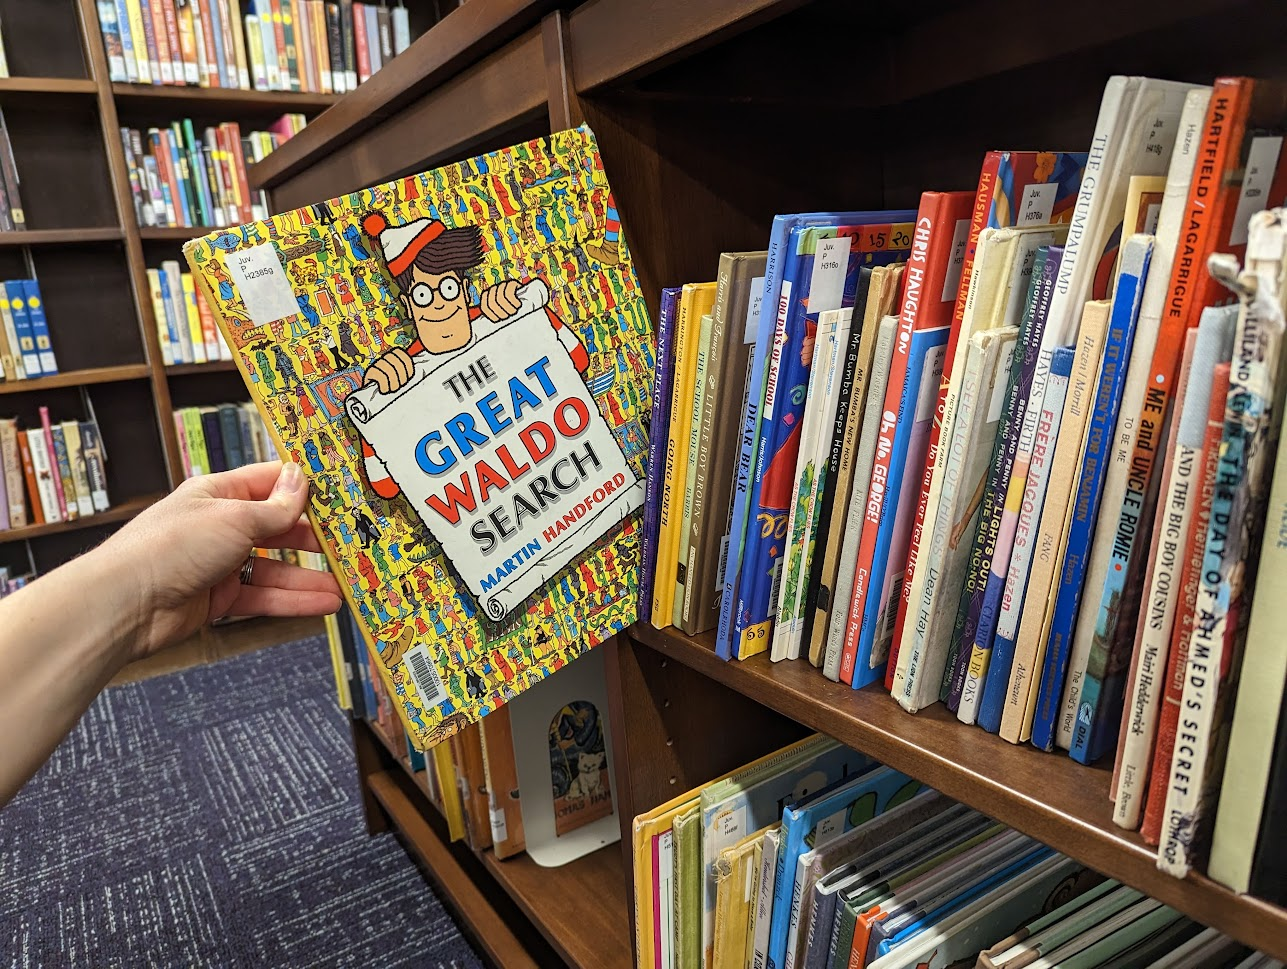 photo of Where's Waldo children's book being pulled off a shelf of other children's books